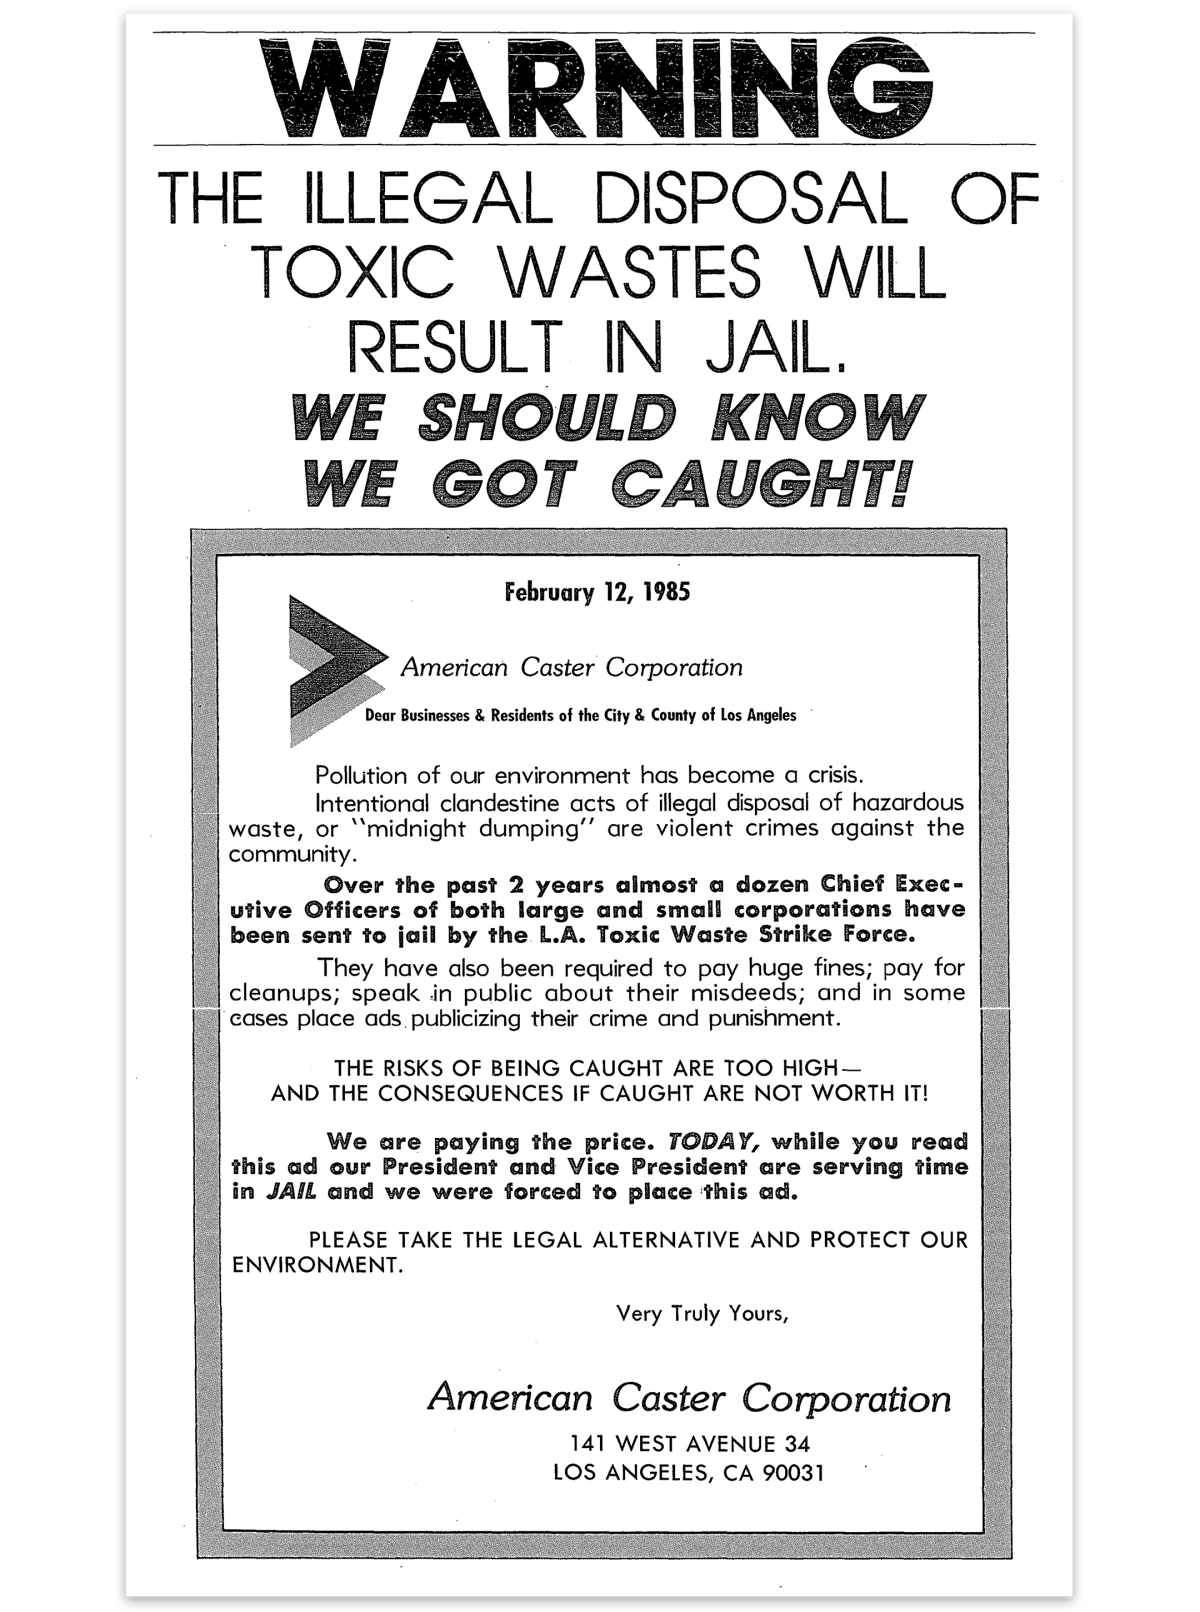 Newspaper ad with text "Warning. The illegal disposal of toxic wastes will result in jail. We should know we got caught!"